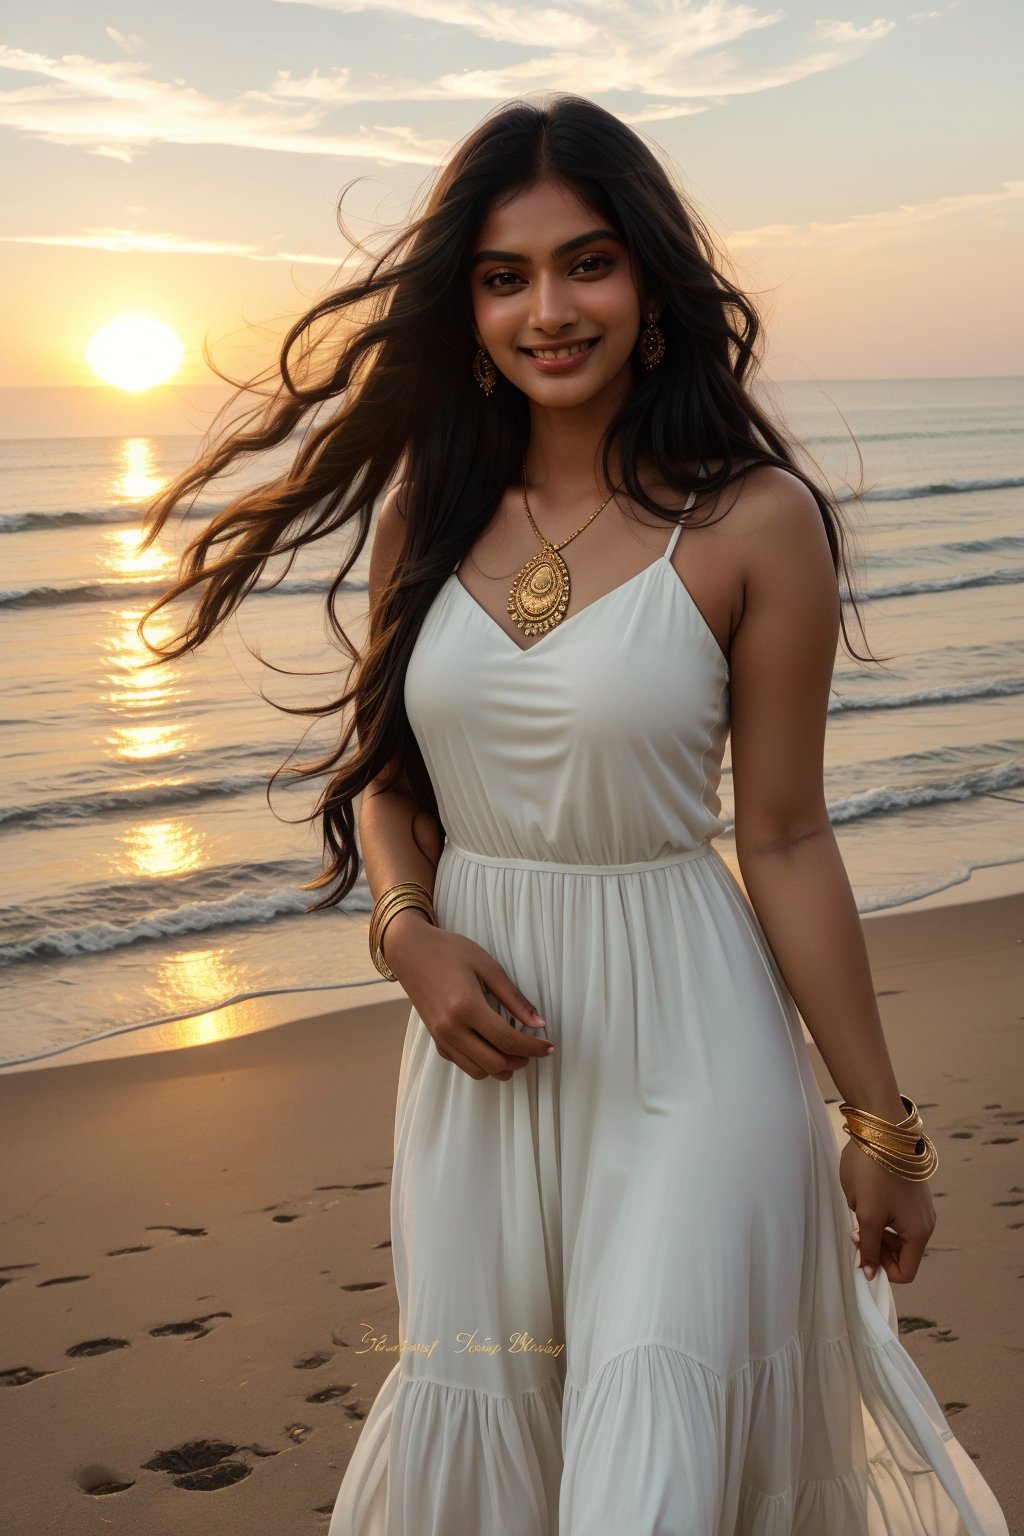 South Asian woman with long, flowing black hair and vibrant green eyes, wearing a flowing white sundress with gold bangles, smiles confidently as she holds her hand on her hip, elbow slightly bent, with a dramatic sunset casting a warm glow on her face.